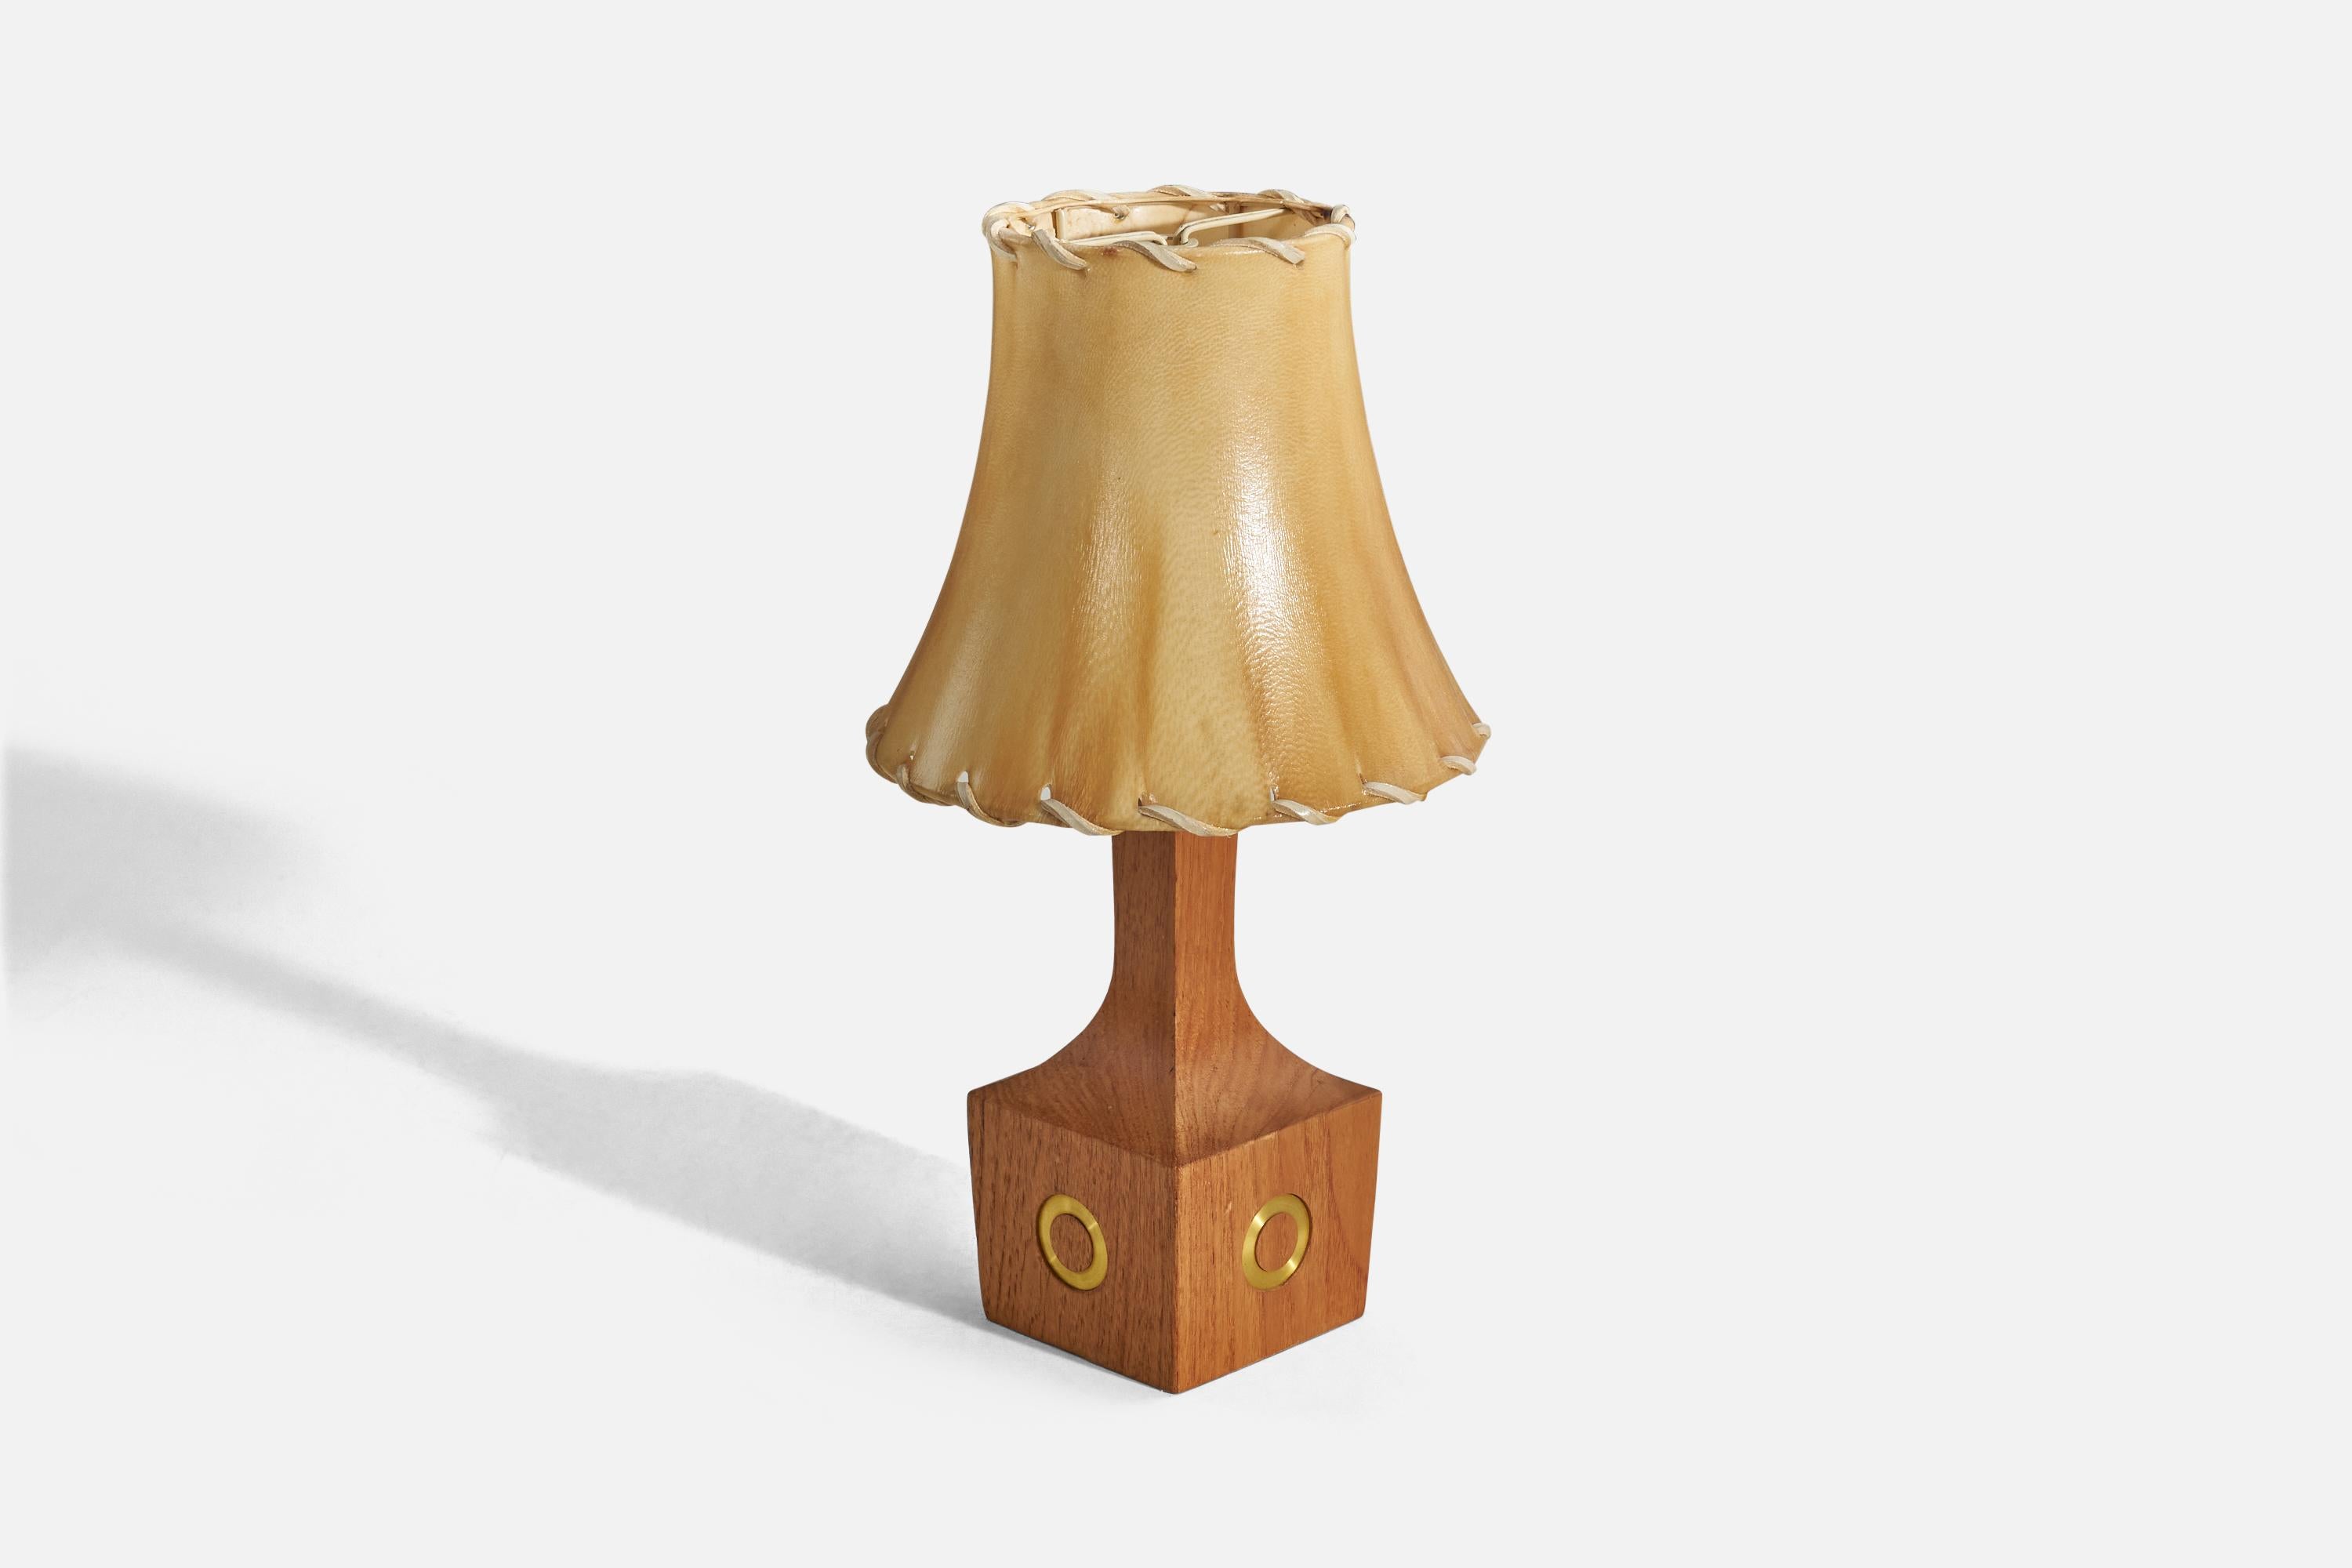 A teak, brass and leather table lamp designed and produced in Denmark, 1950s.

Sold with lampshade. 
Dimensions of lamp (inches) : 10.06 x 3.52 x 3.52 (height x width x depth)
Dimensions of shade (inches) : 4.12 x 7.25 x 6.37 (top diameter x